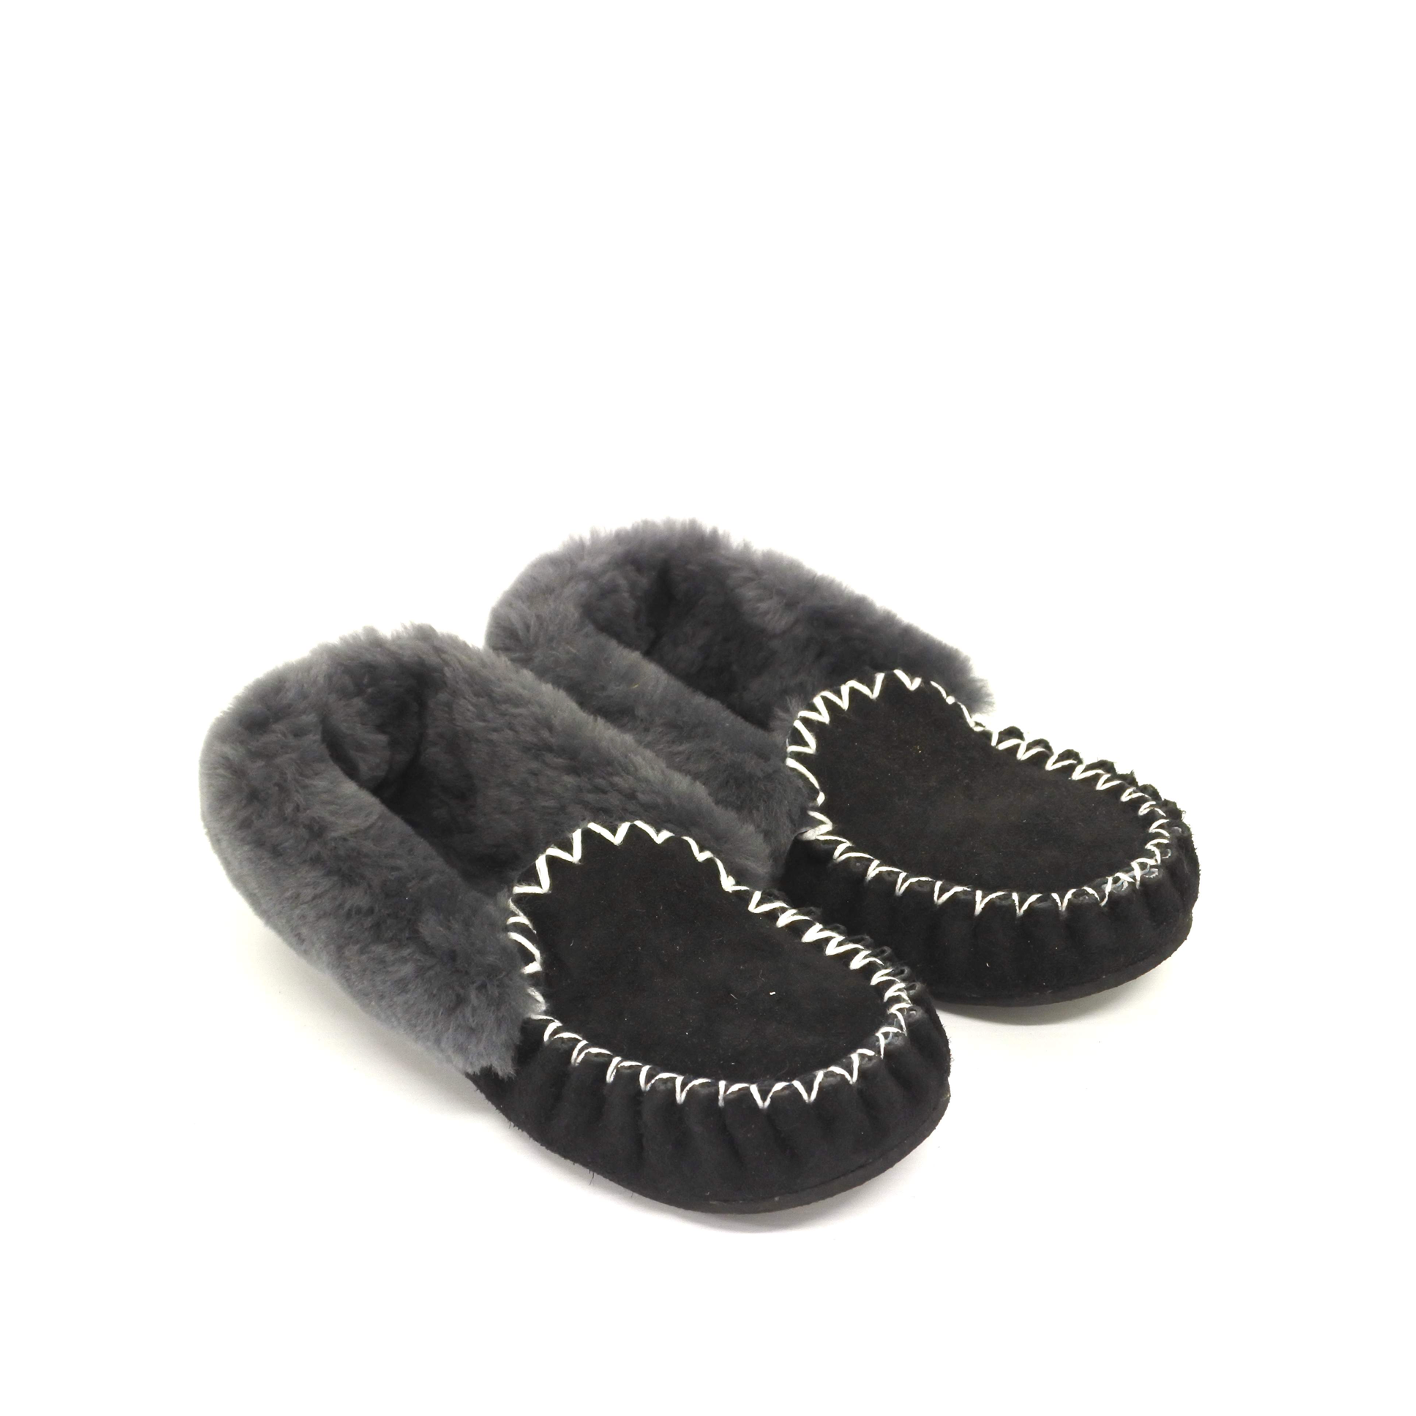 MEN'S TRADITIONAL MOCCASINS